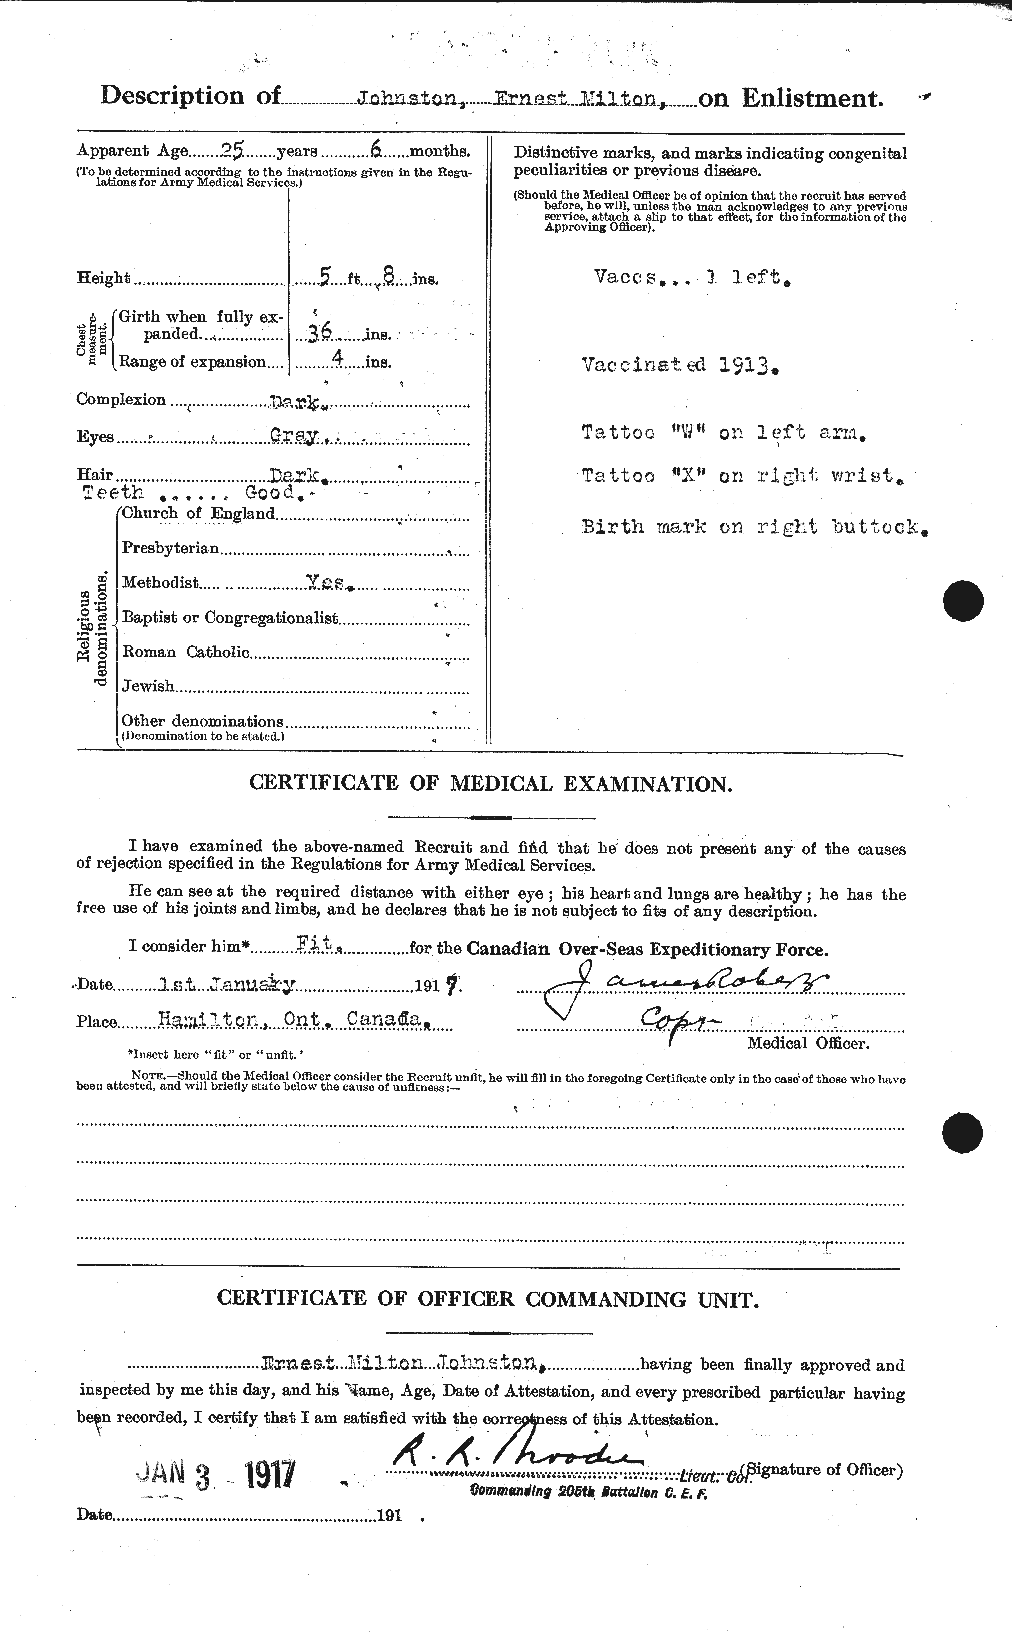 Personnel Records of the First World War - CEF 423247b